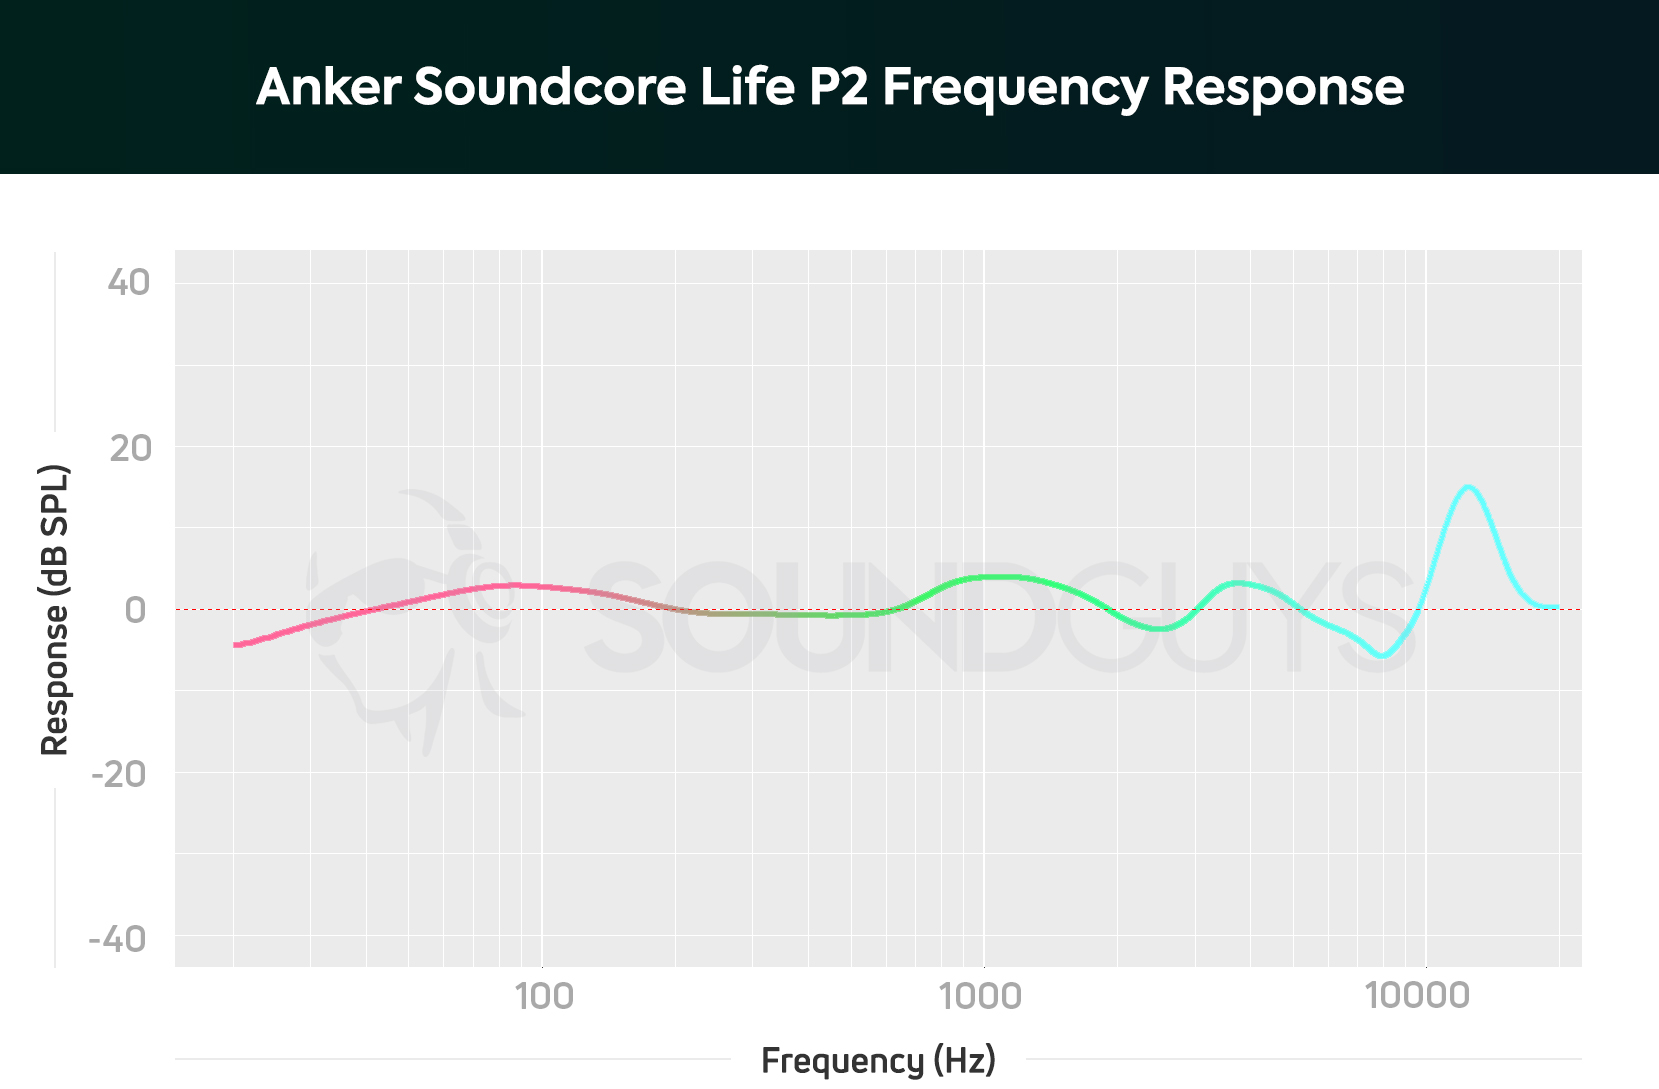 A chart depicts the Anker Soundcore Life P2 frequency response.